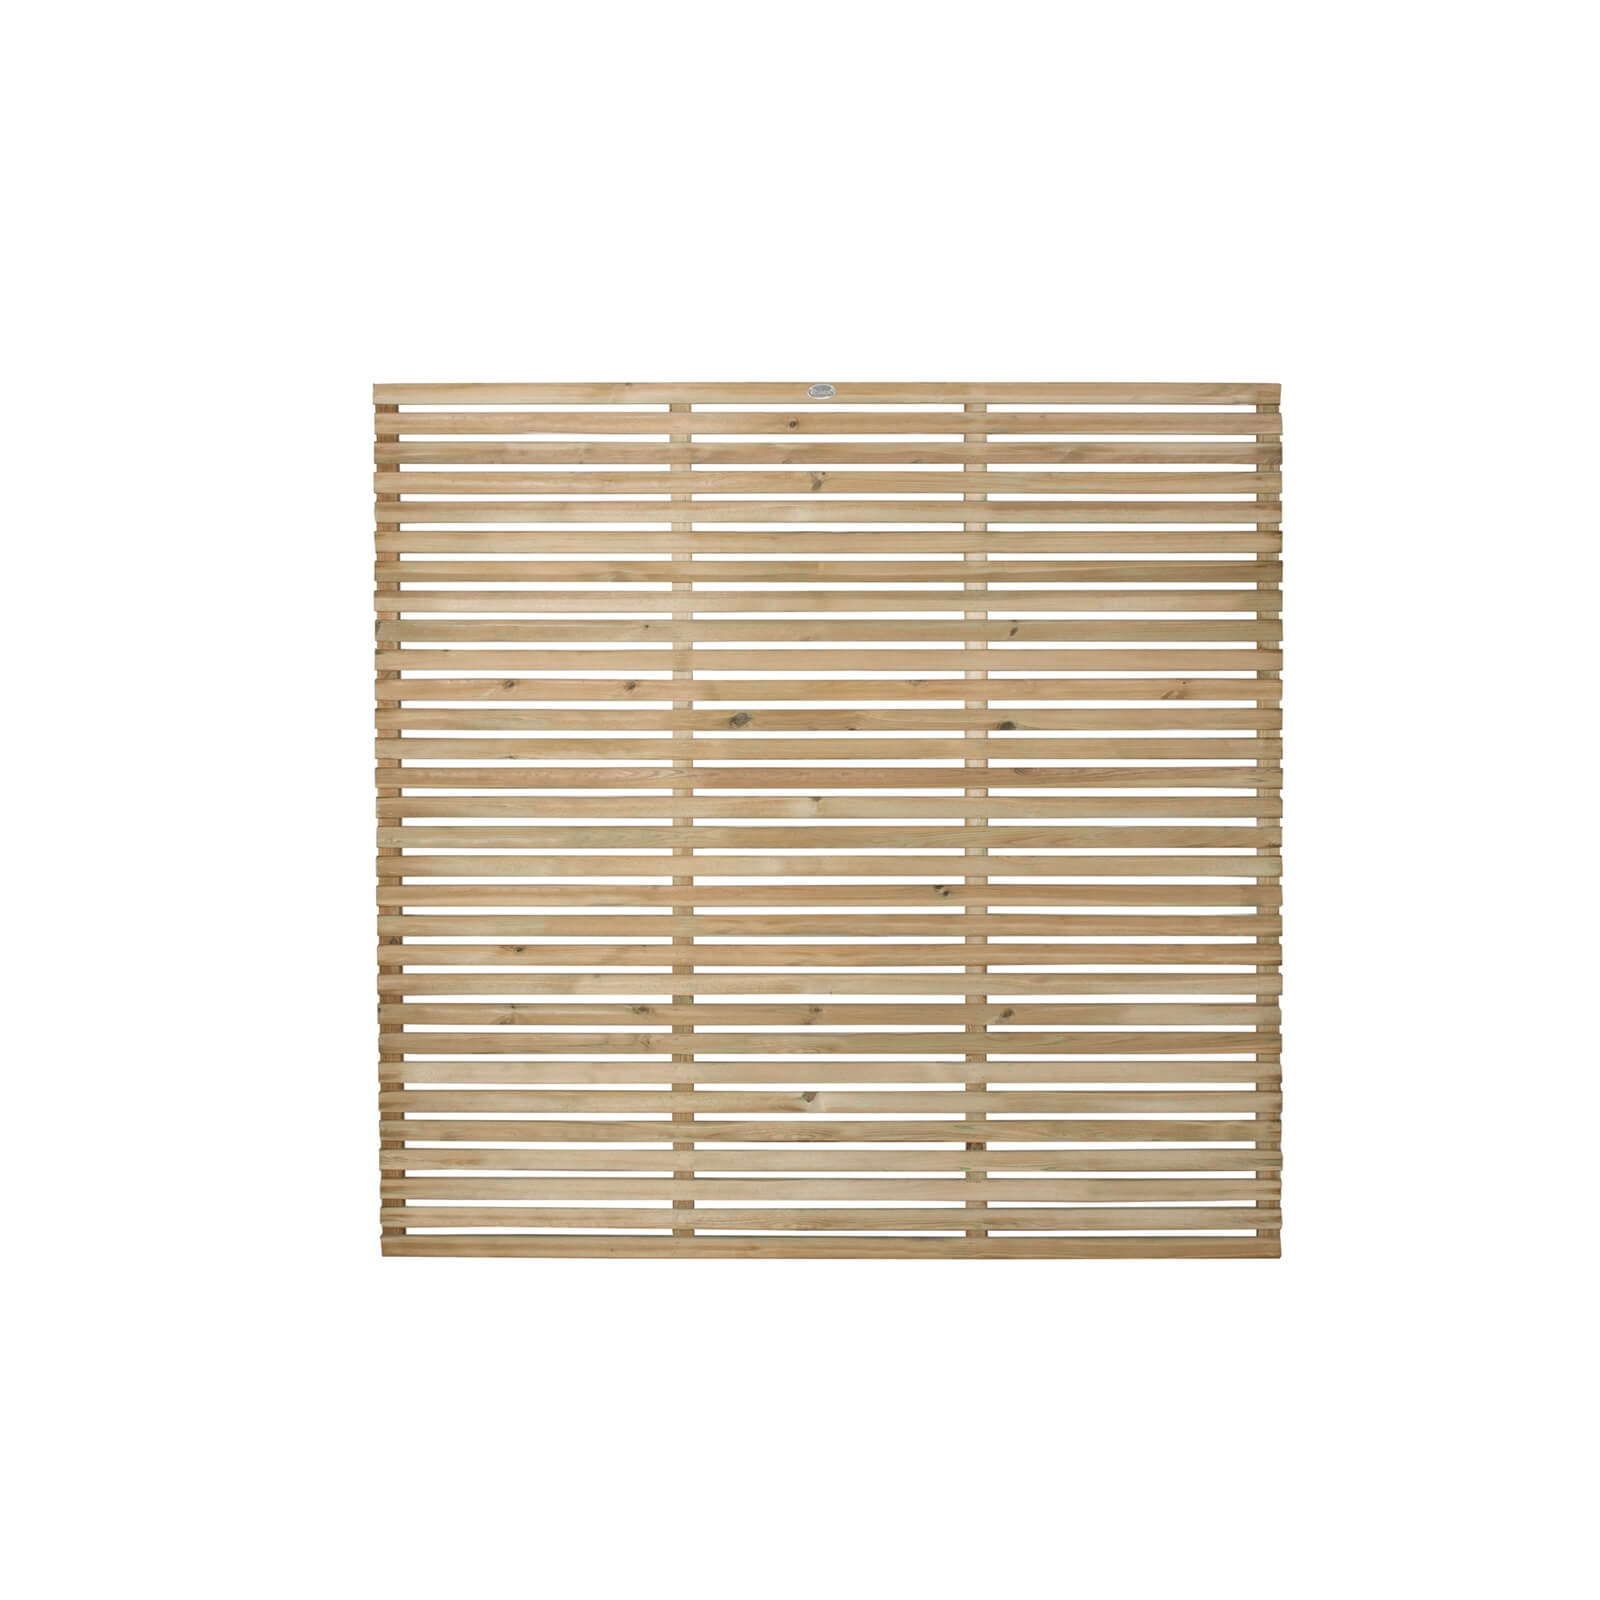 Forest Slatted Fence Panel - 6ft - Pack of 4